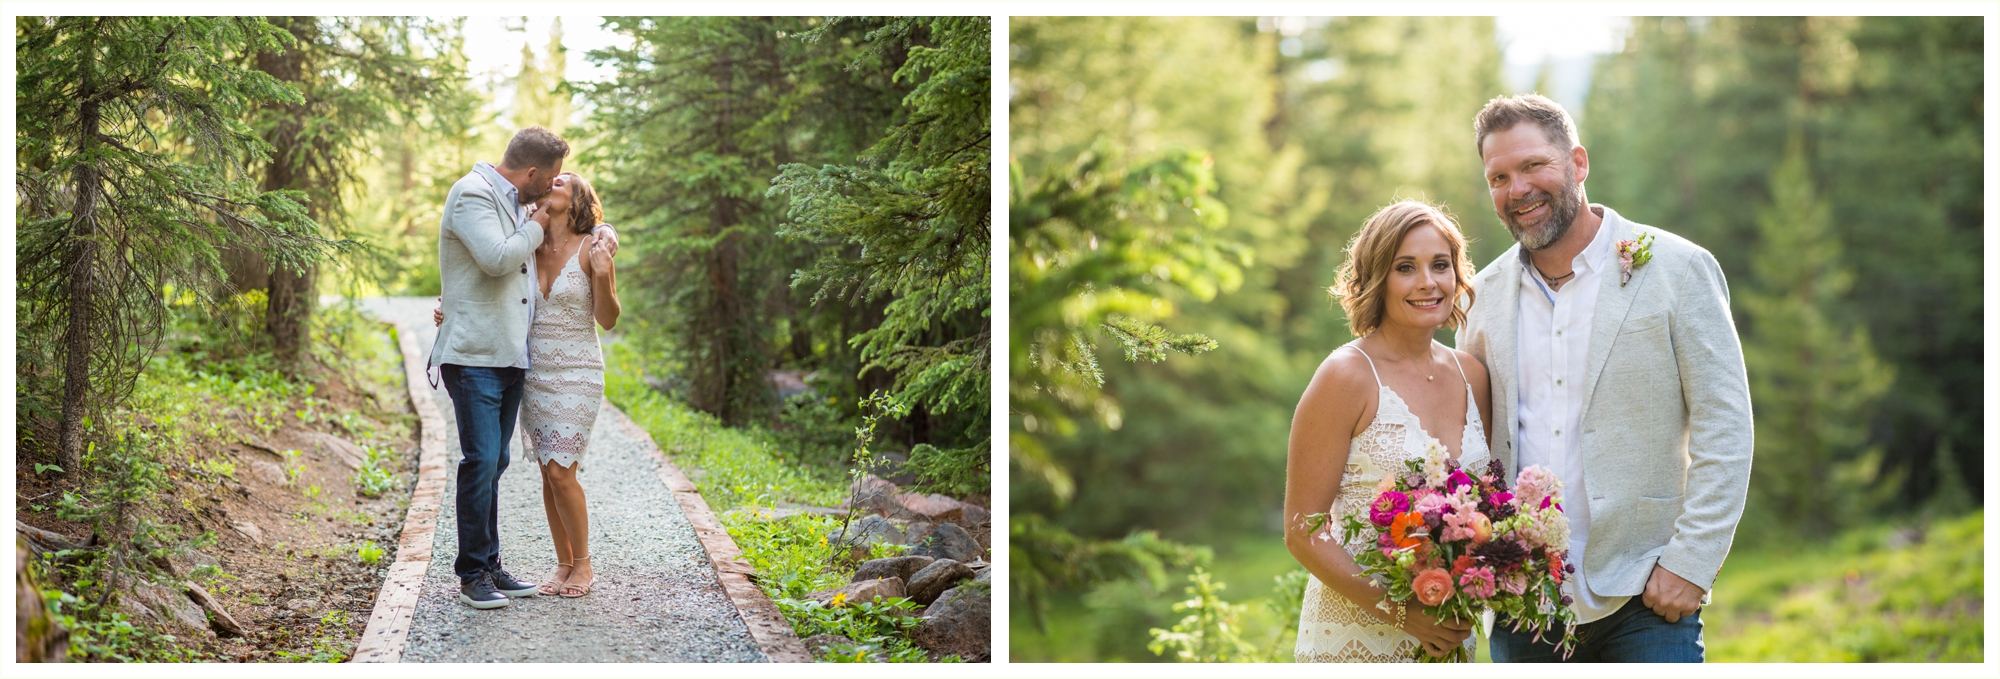 bride and groom outdoor portraits at shrine pass during vail elopement in colorado summer wedding